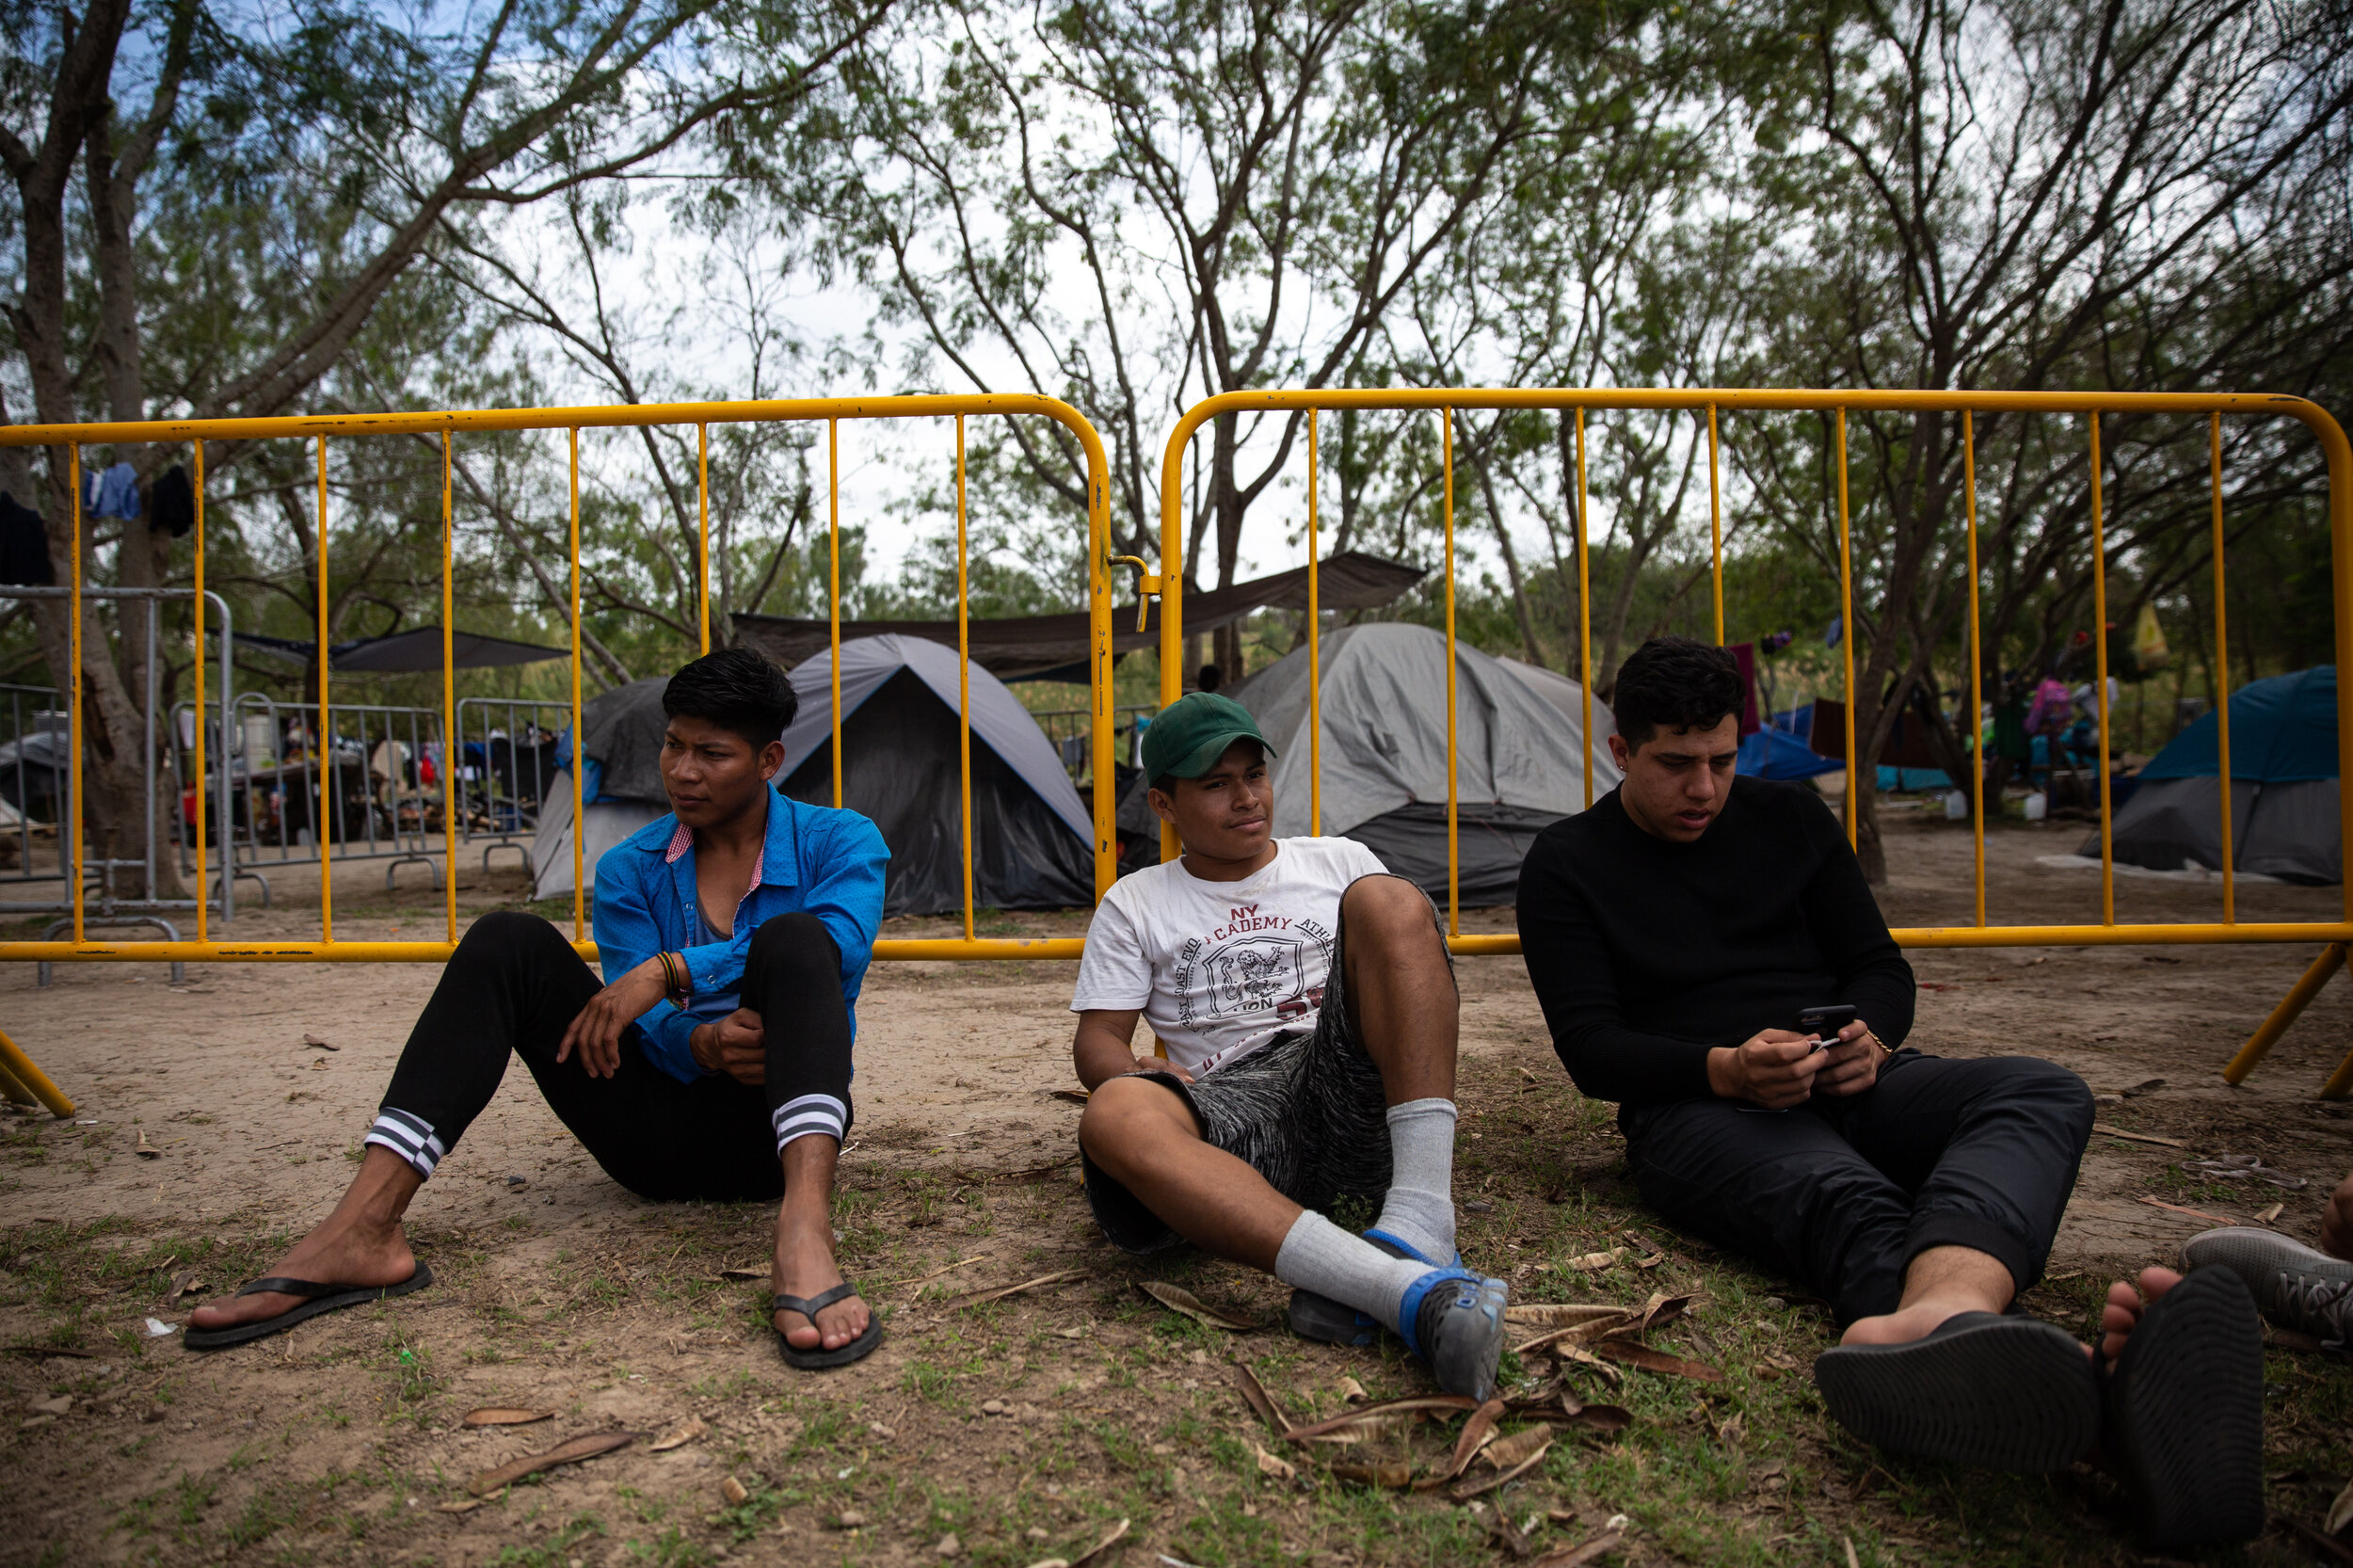  Mynor Emilio Cruz, Jose Jonathan Carrillo and Damian Meza take a break from constructing the new 'comedor' or dining hall structure at the migrant camp in Matamoros, Mexico.  